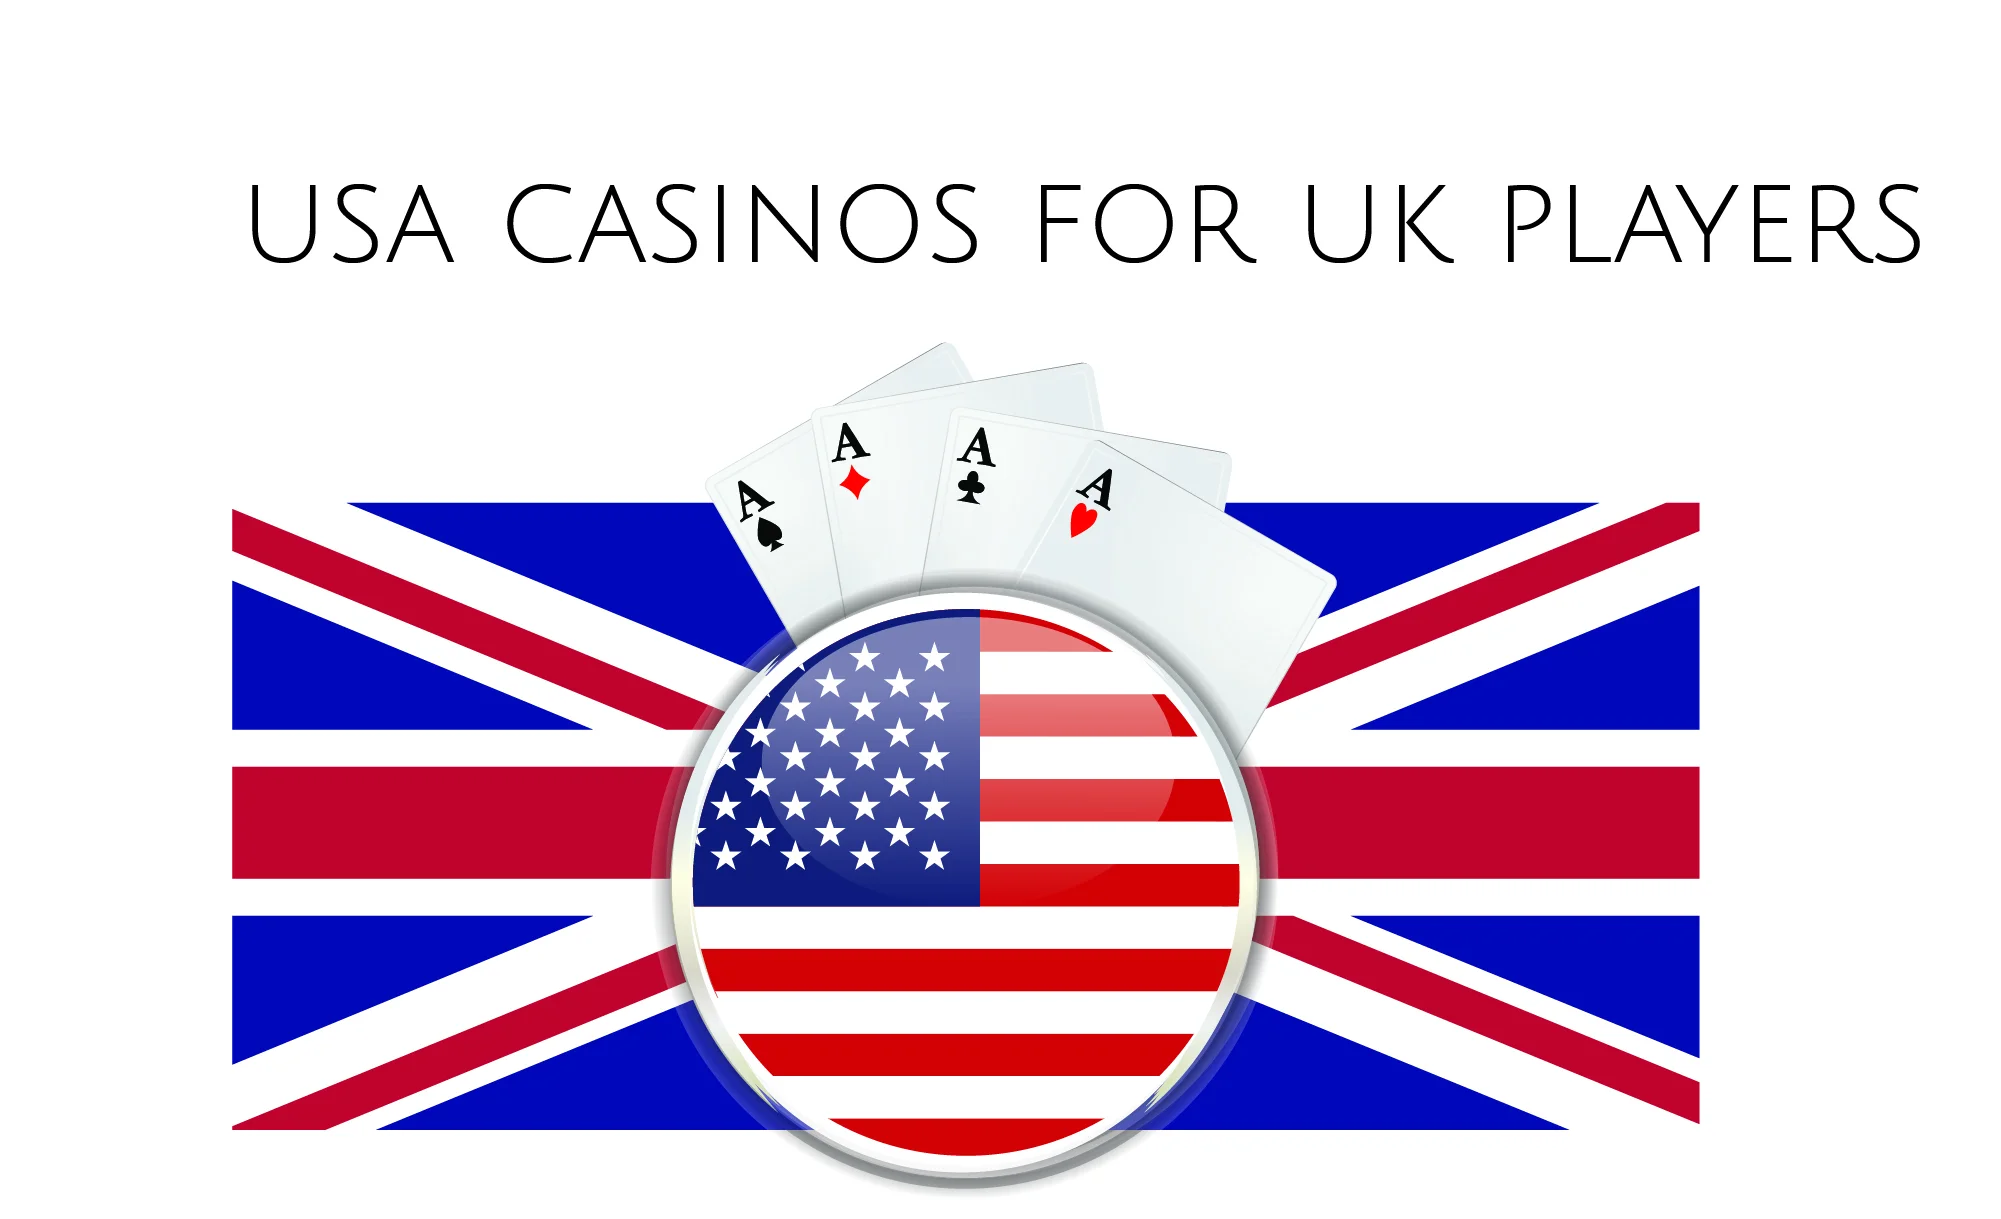 USA casinos accept players from Britain